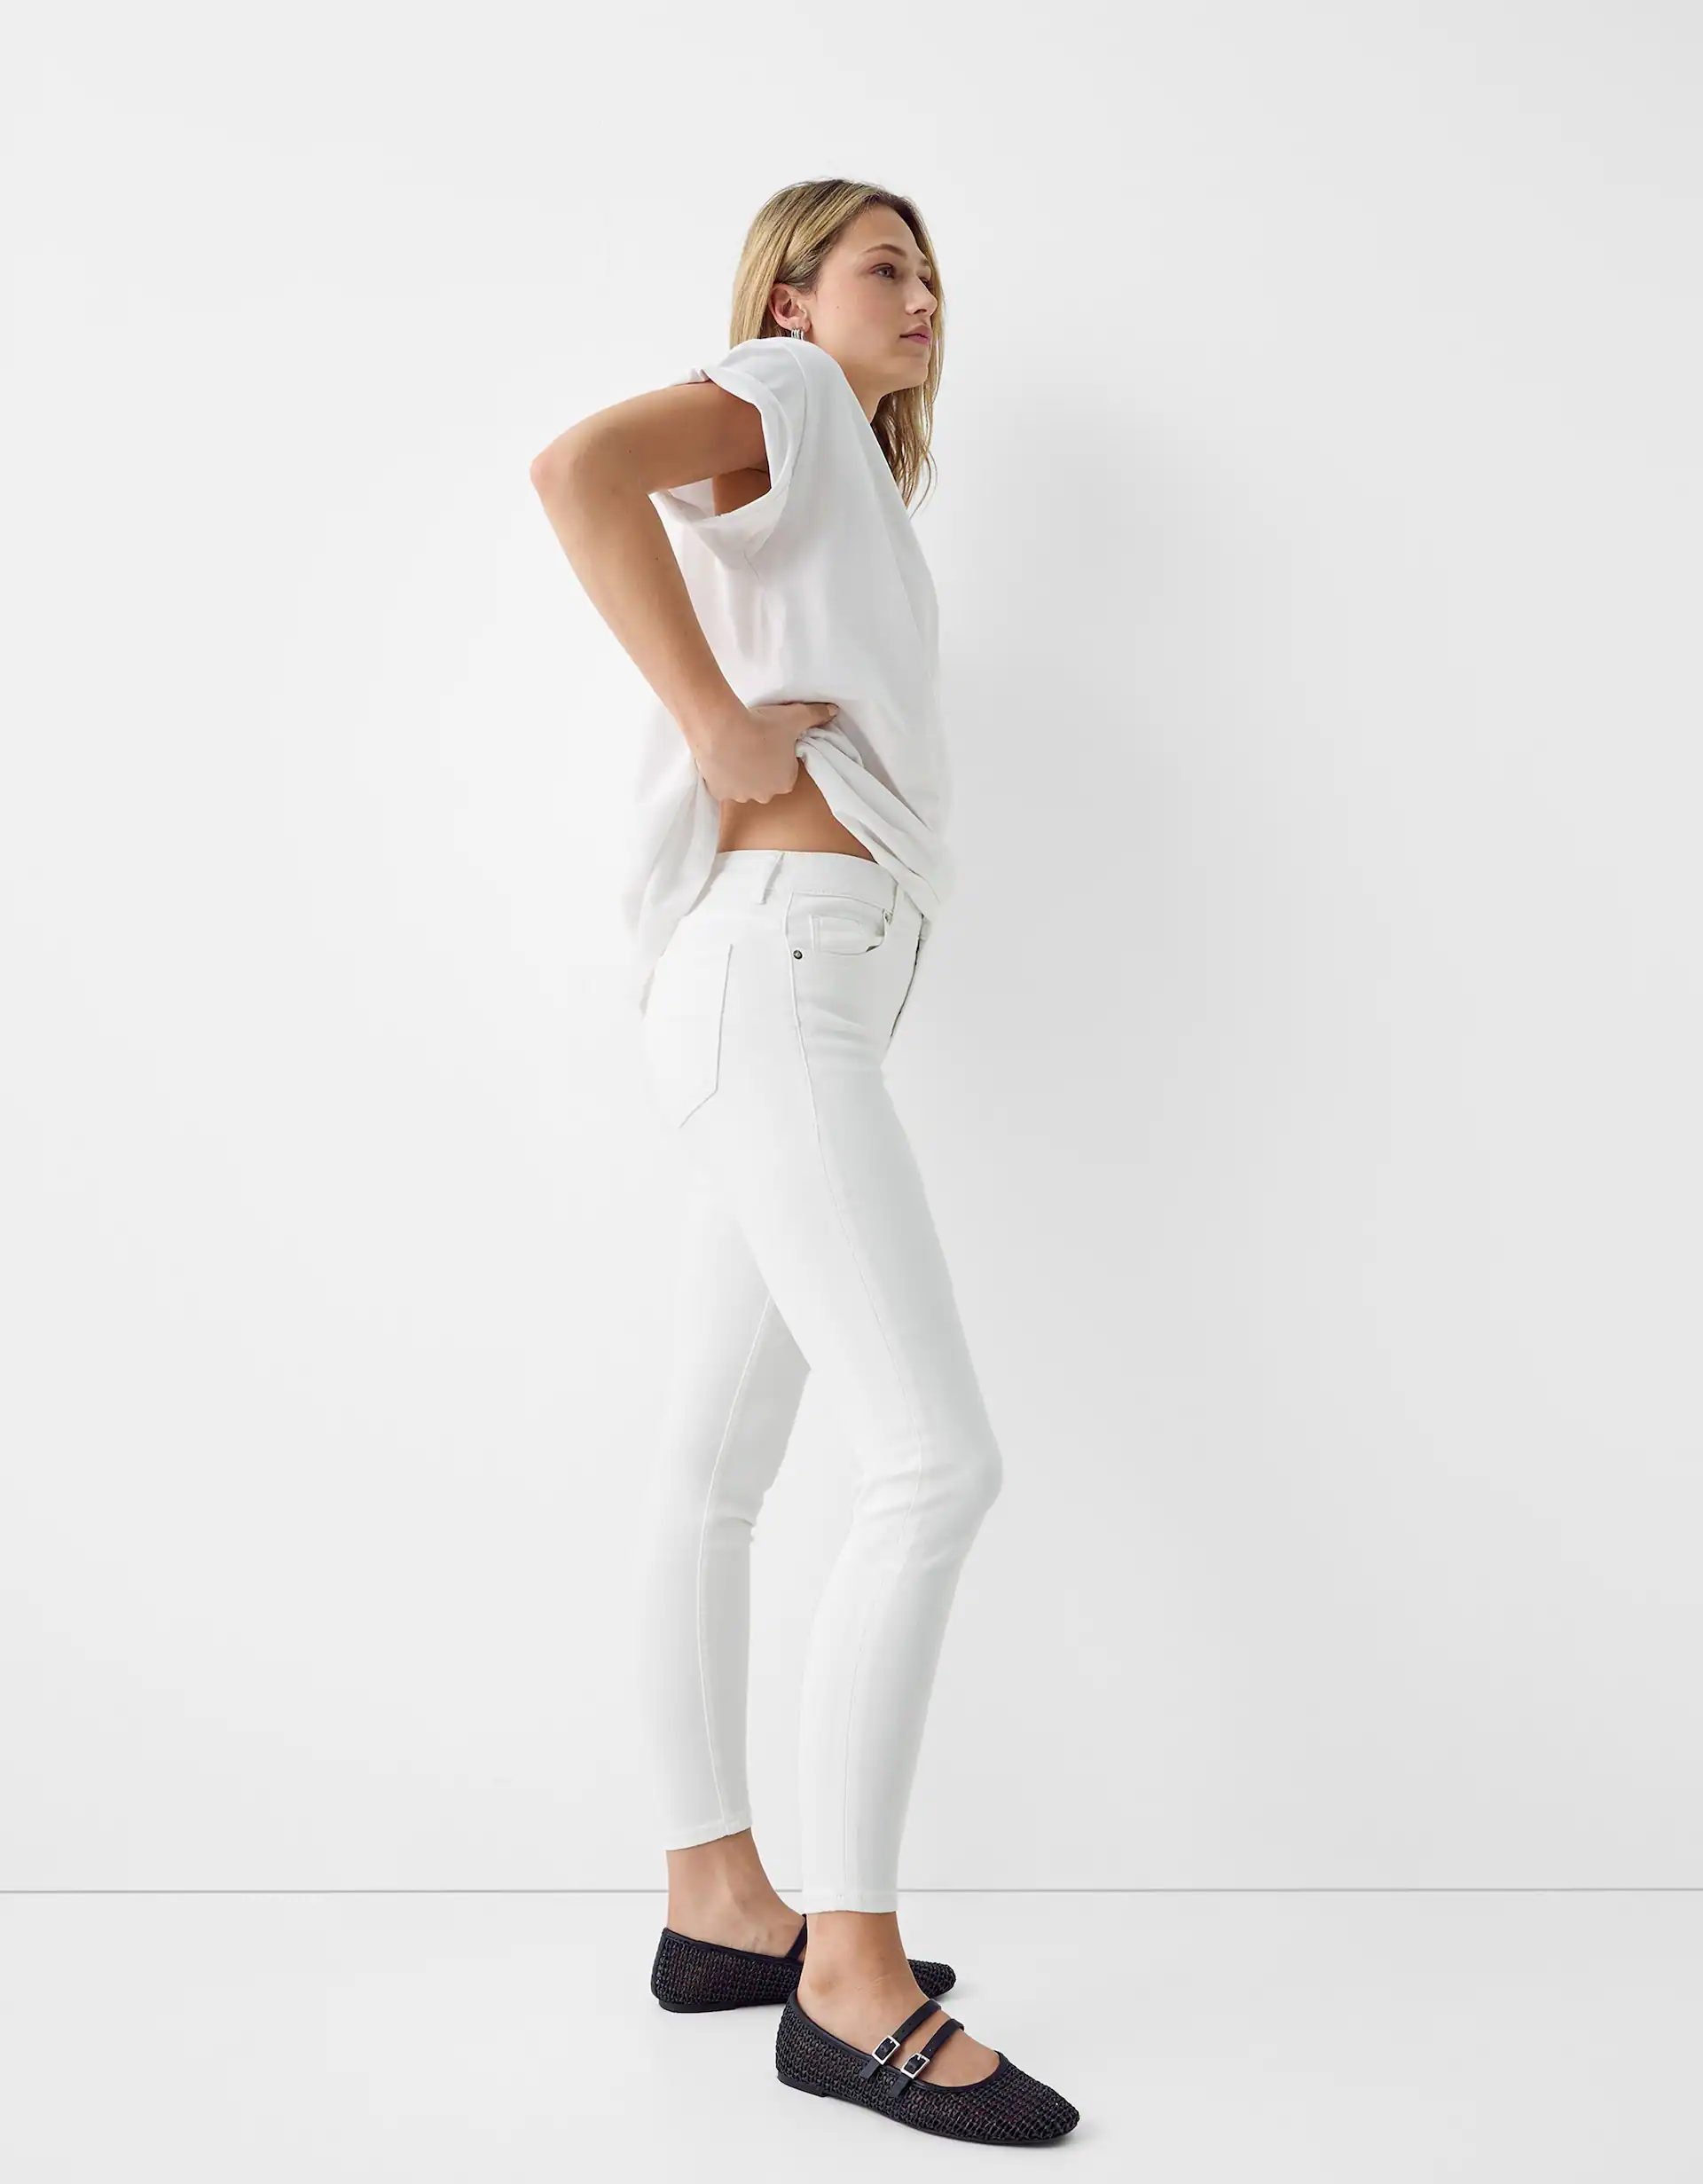 Jeans skinny push-up - Mujer